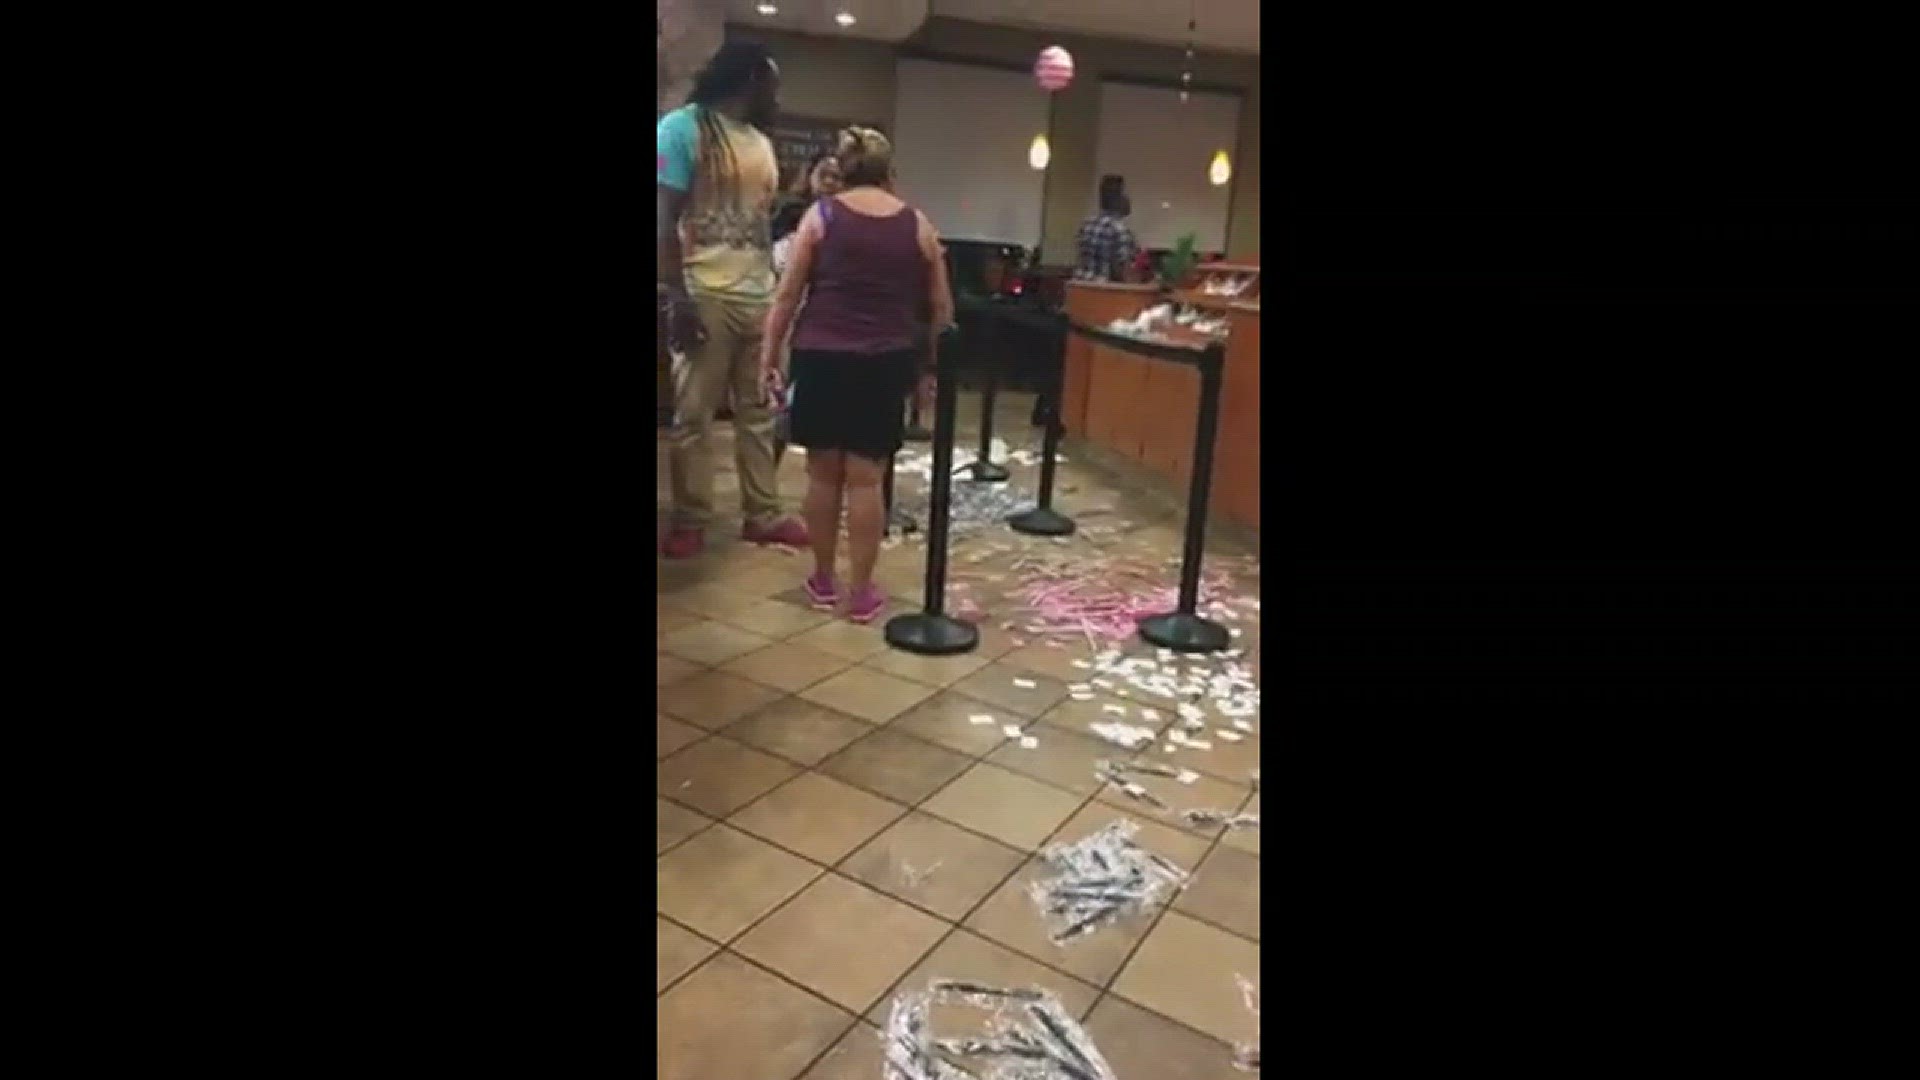 In a fit of rage a woman trashed a Chick-Fil-A on her way out